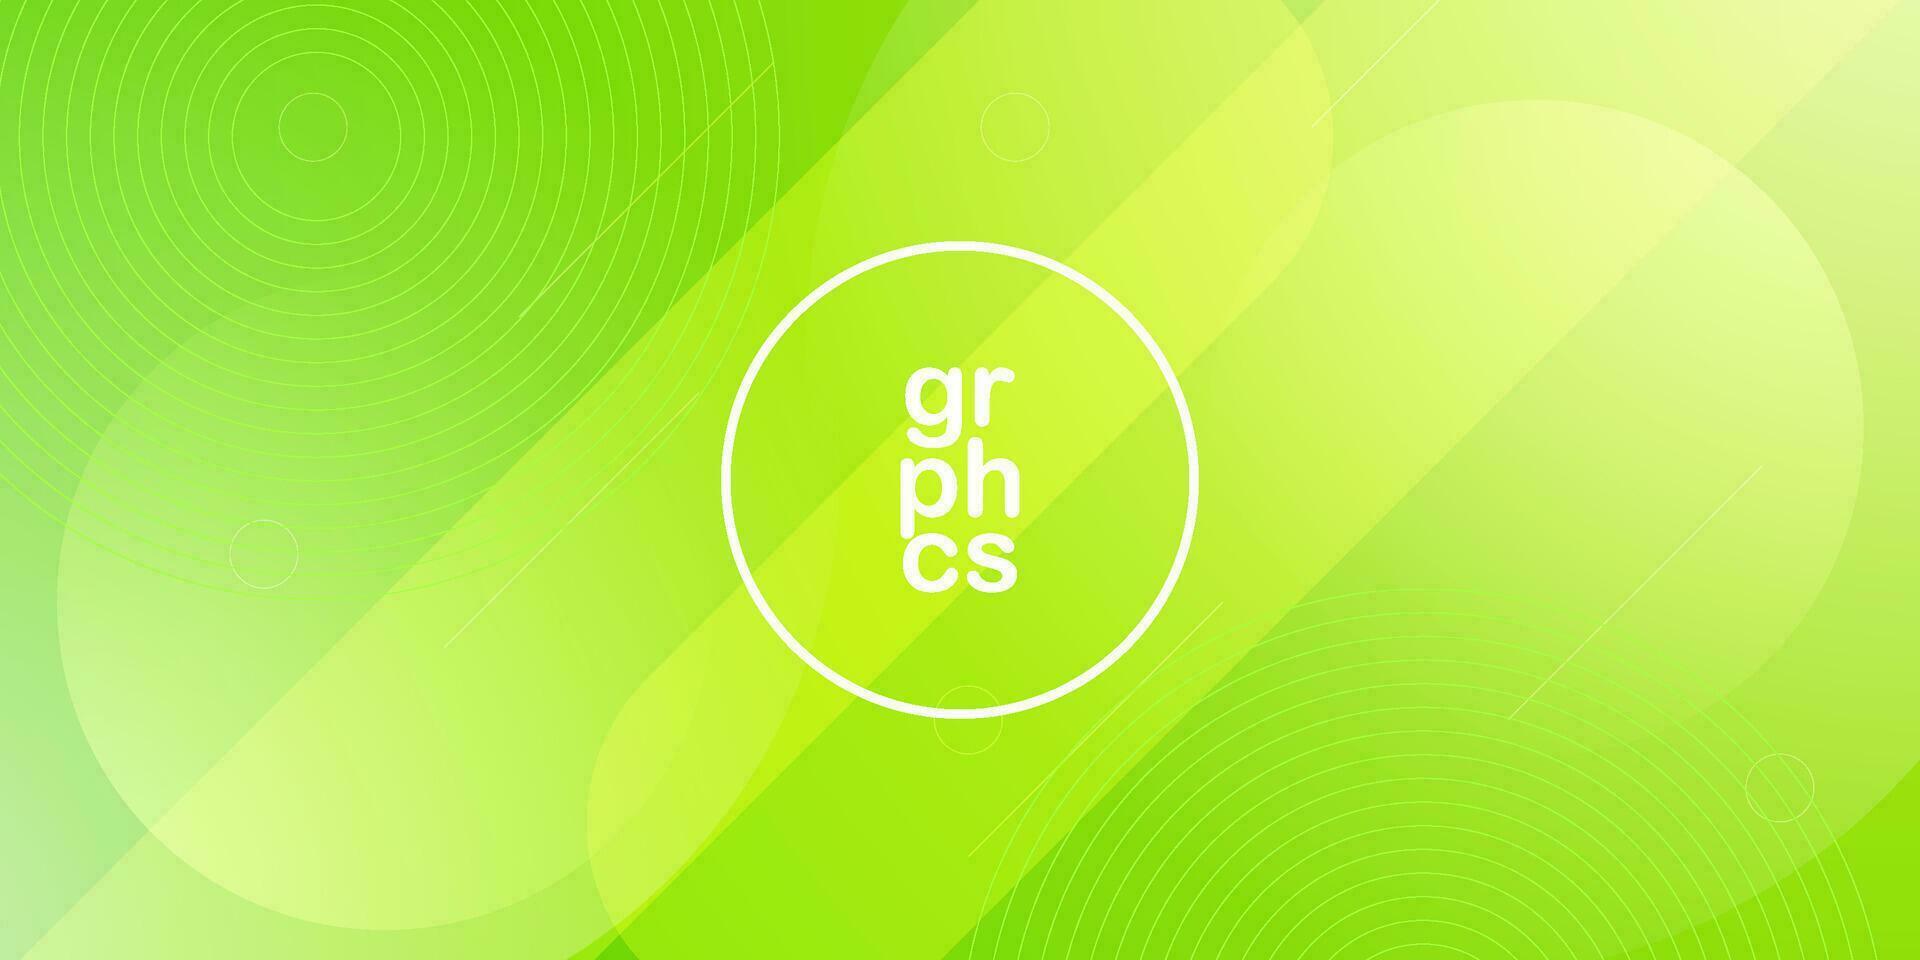 Abstract bright green gradient illustration background with 3d look and simple pattern. cool design.Eps10 vector